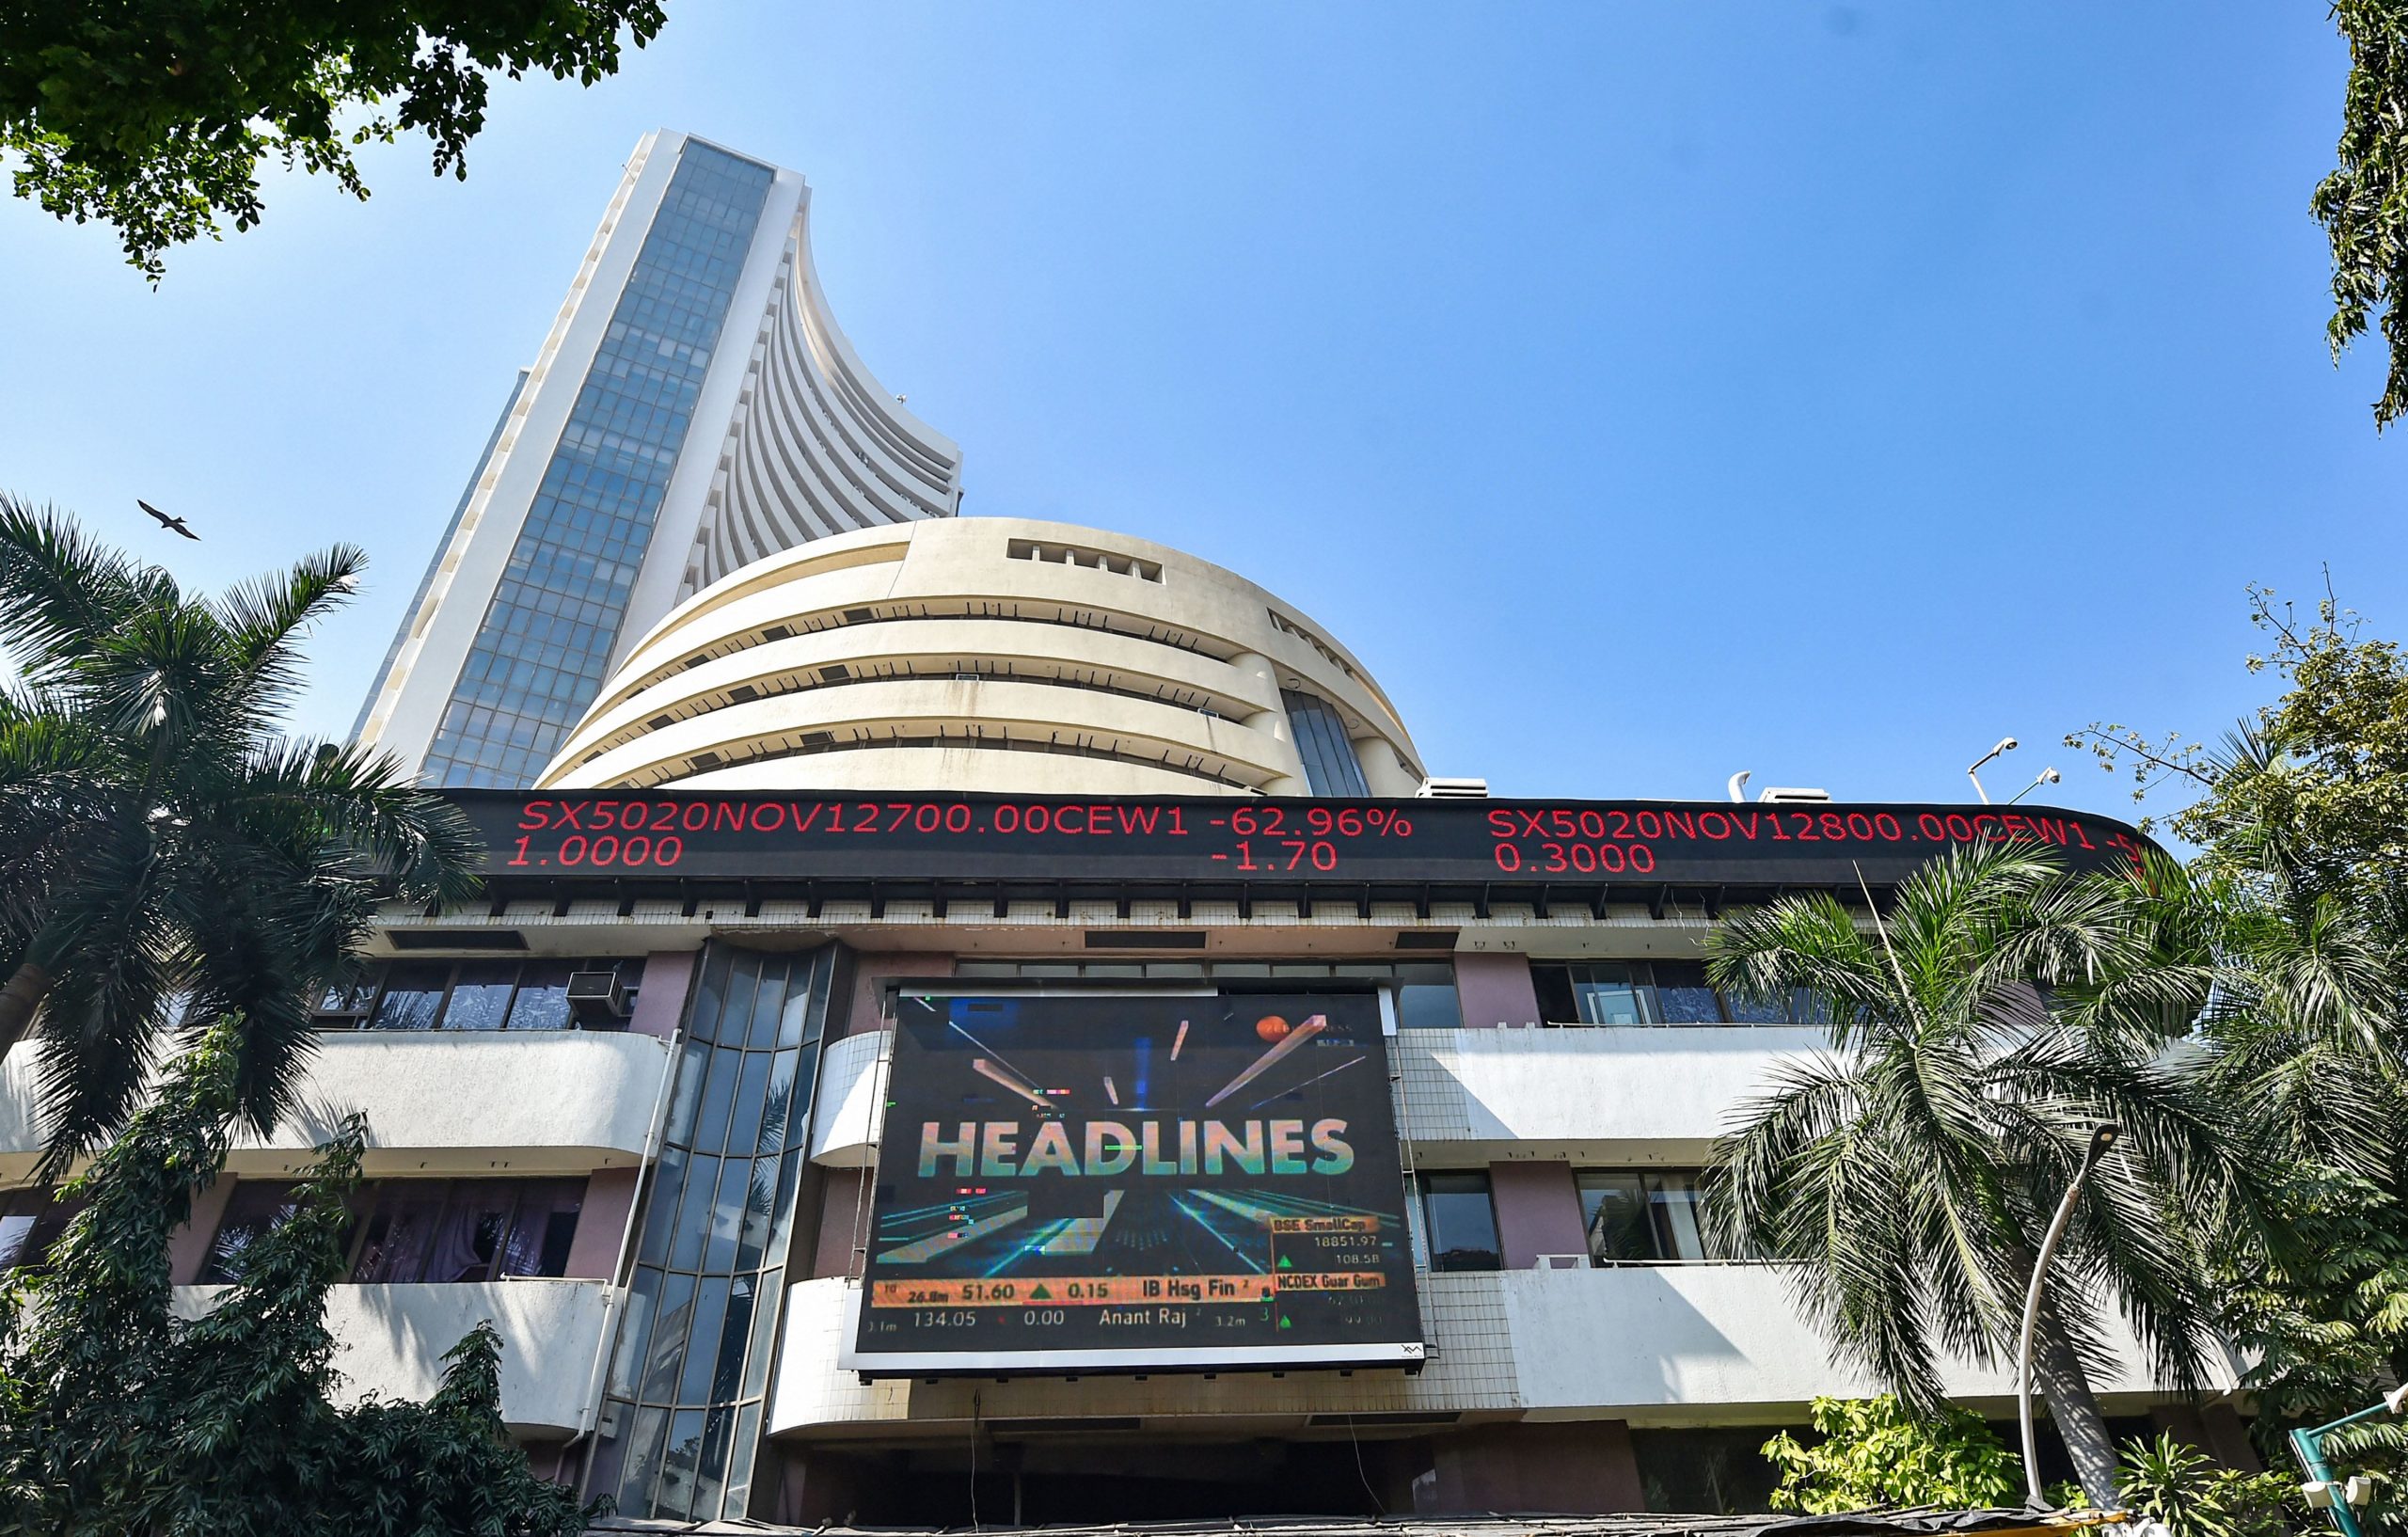 Trending Stocks: Lupin, HDFC, Airtel, KSE and others in news today